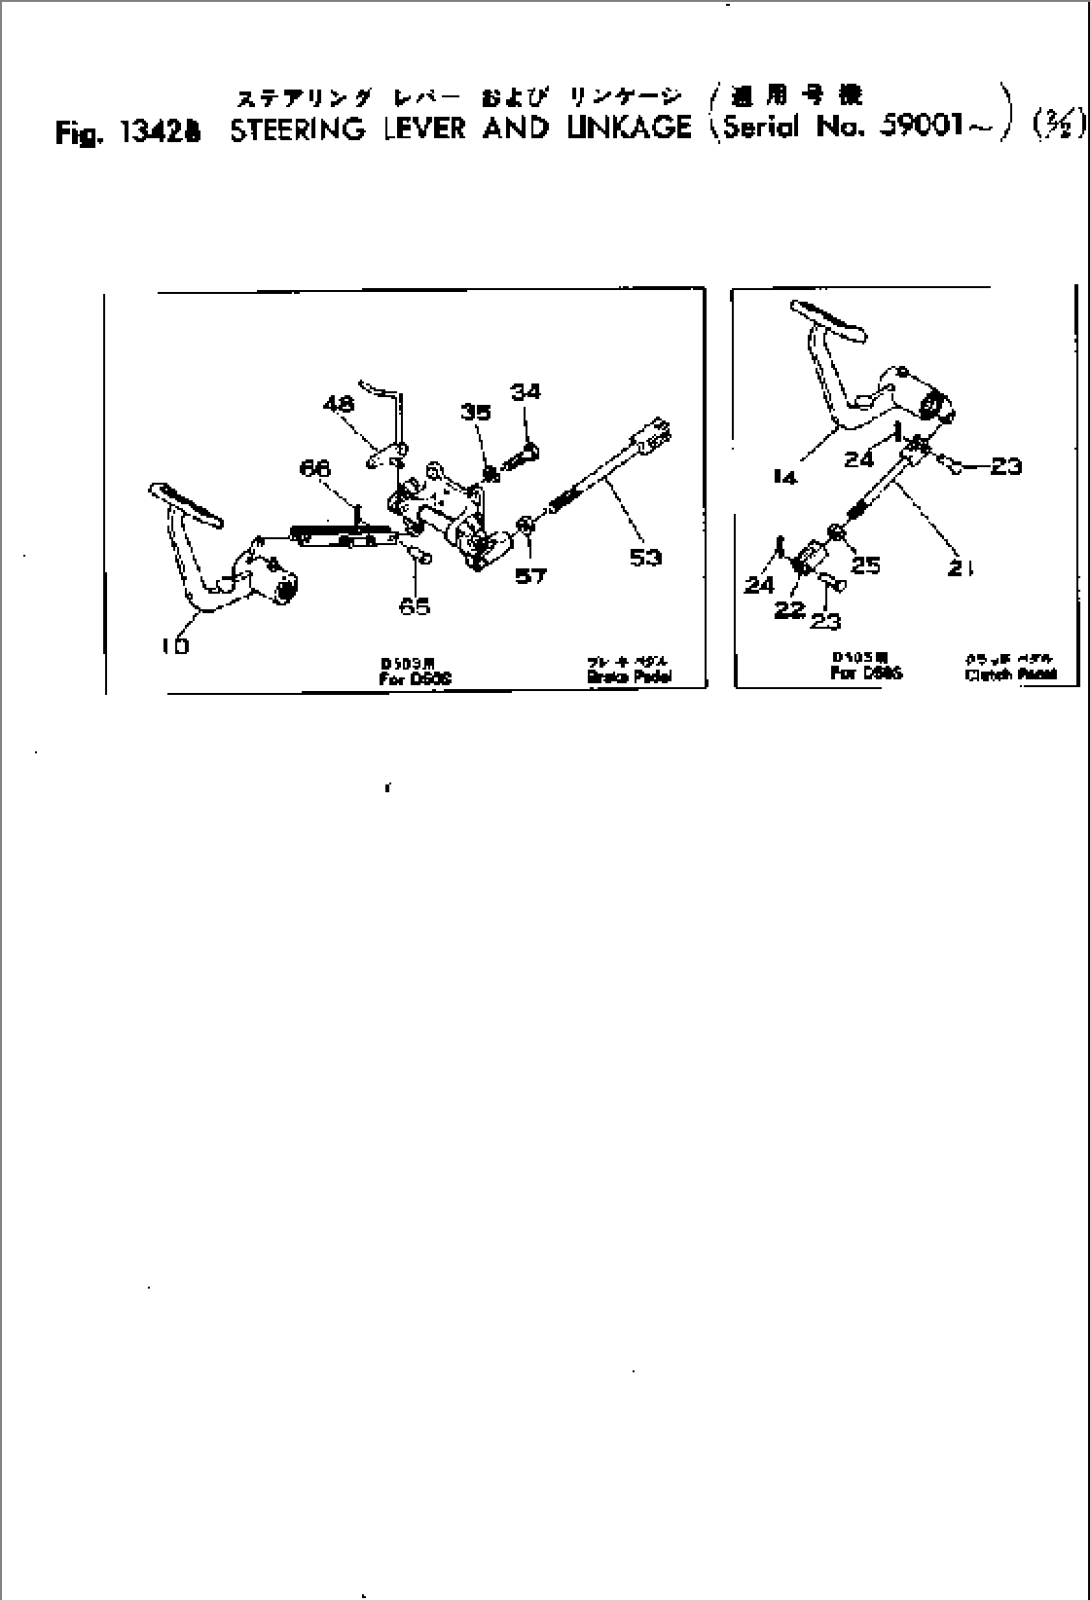 STEERING LEVER AND LINKAGE (2/2)(#59001-)